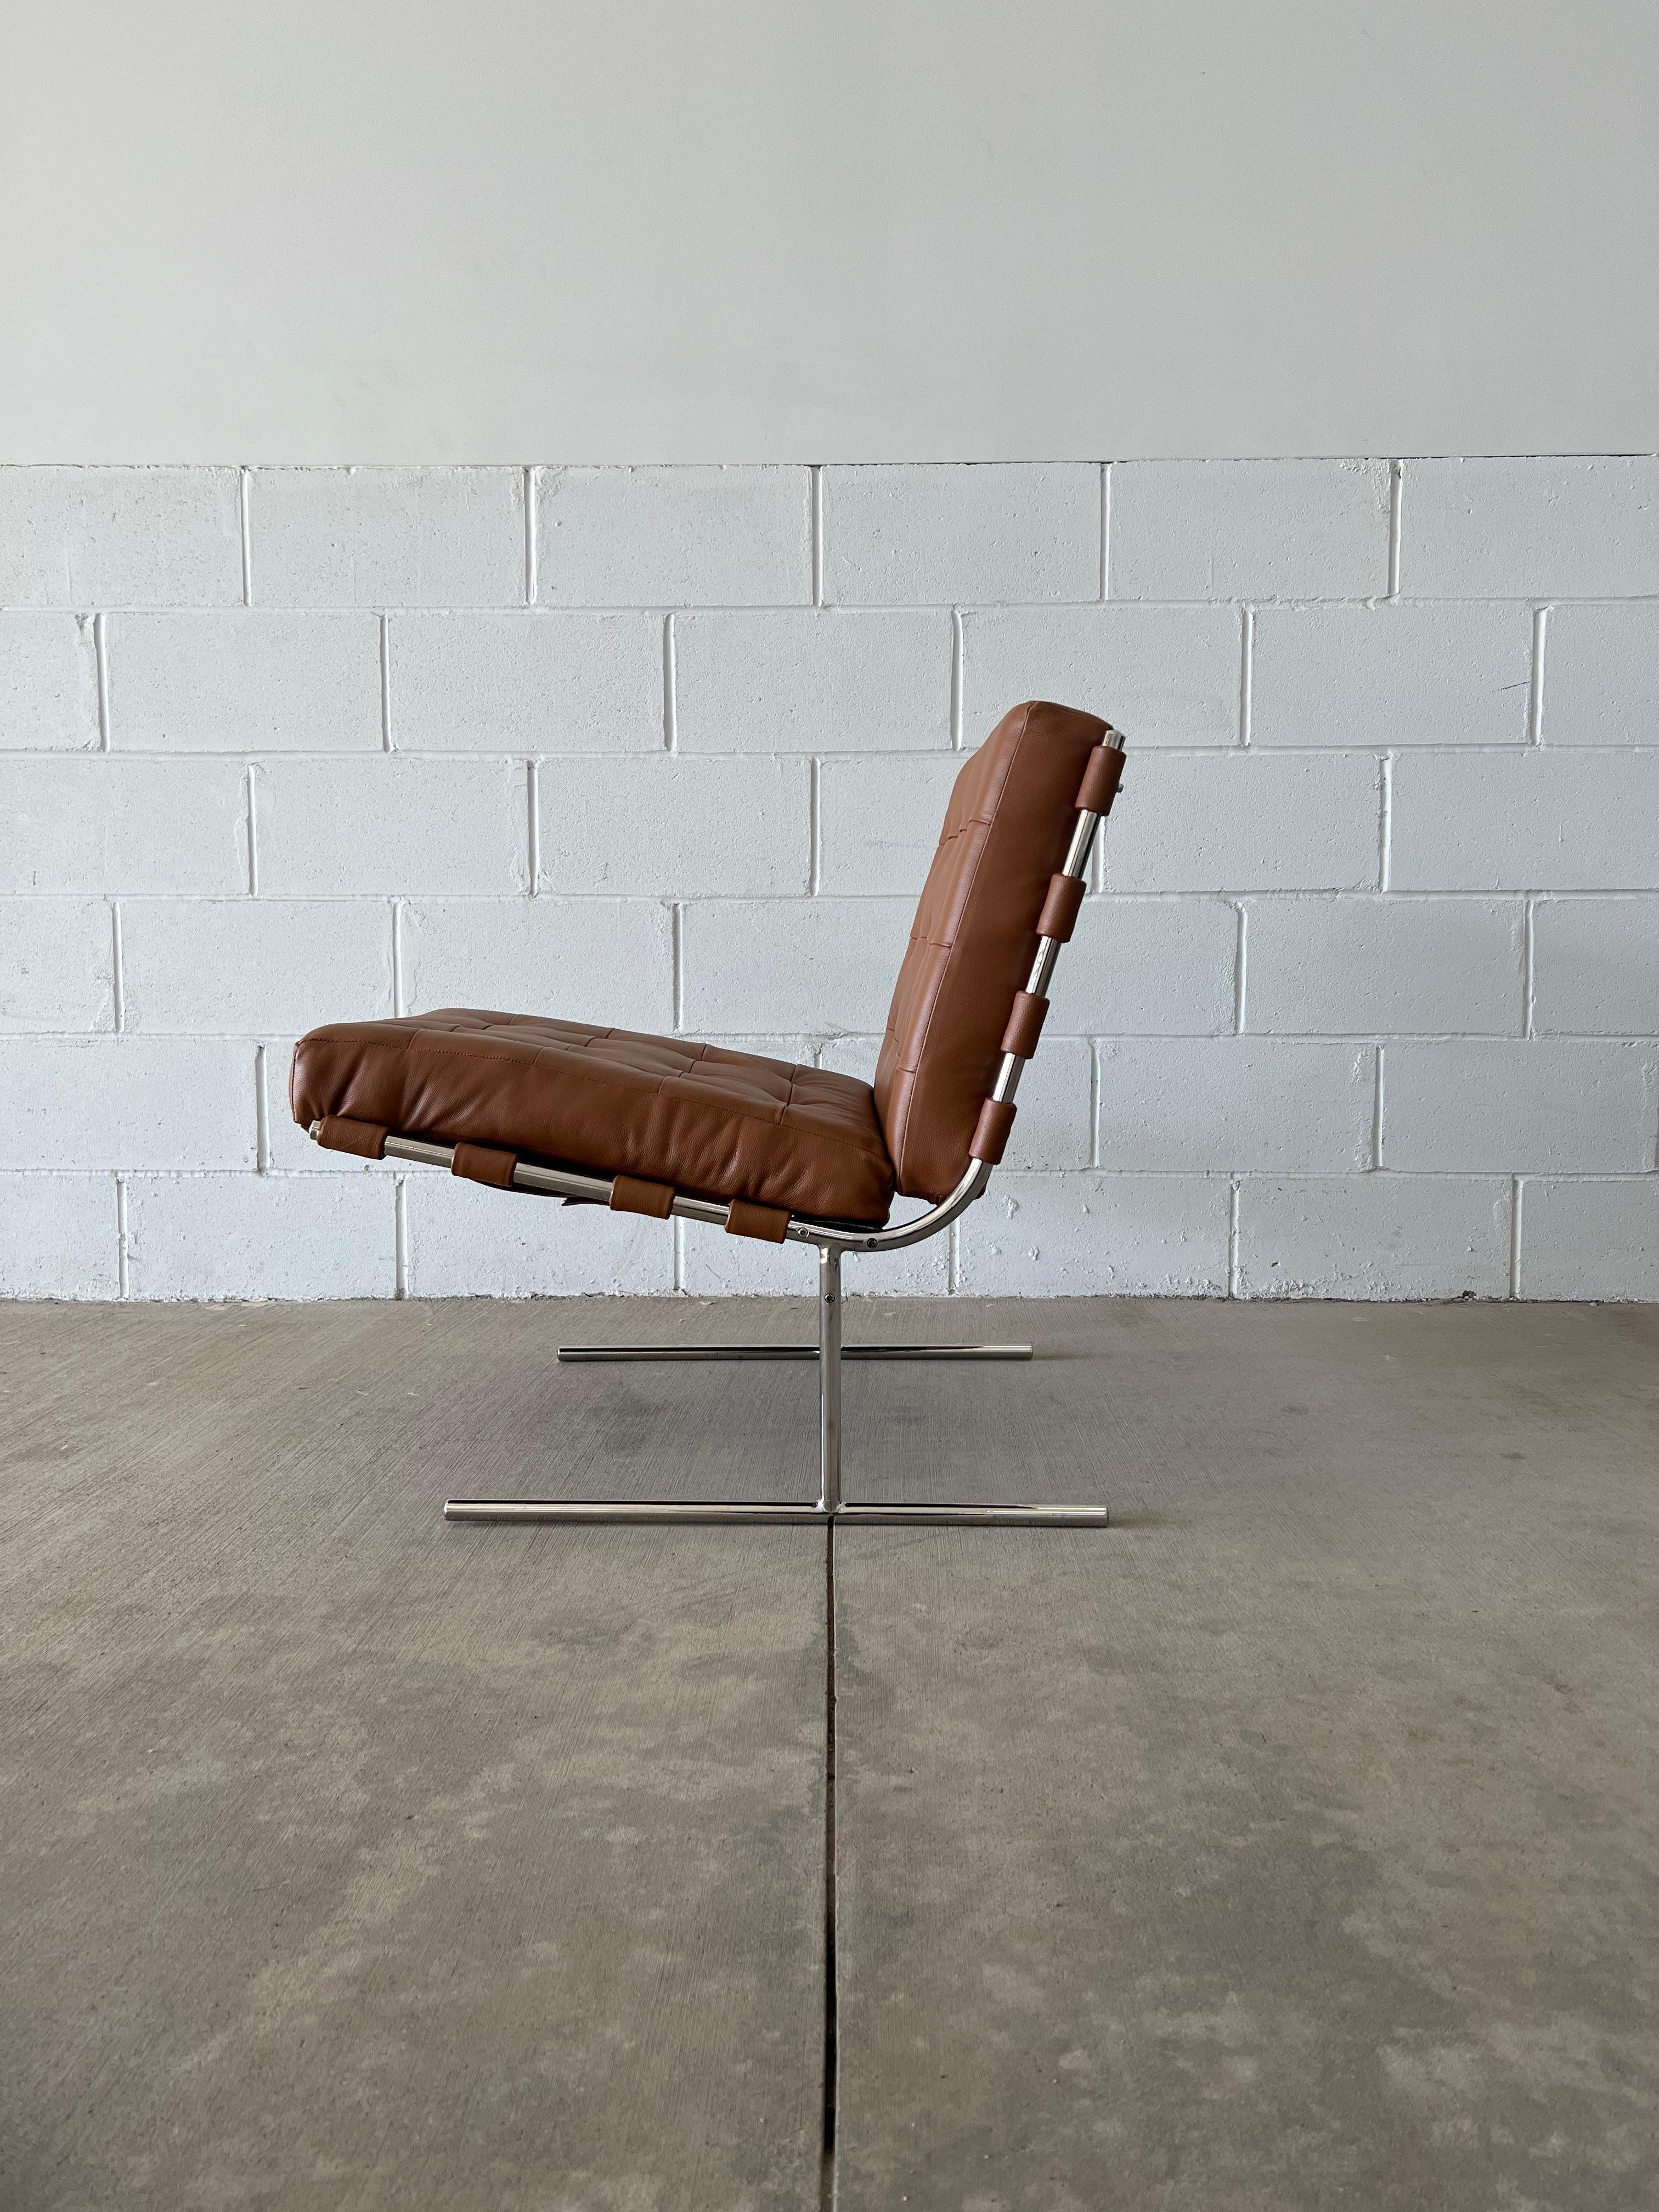 An iconic design by one of the founding fathers of Brazilian Modernism, the T invertido Lounge chair or commonly known as the Oxford lounge chair (unmarked) by Jorge Zalszupin feels like the answer to the ubiquitous Barcelona chair by Ludwig Mies